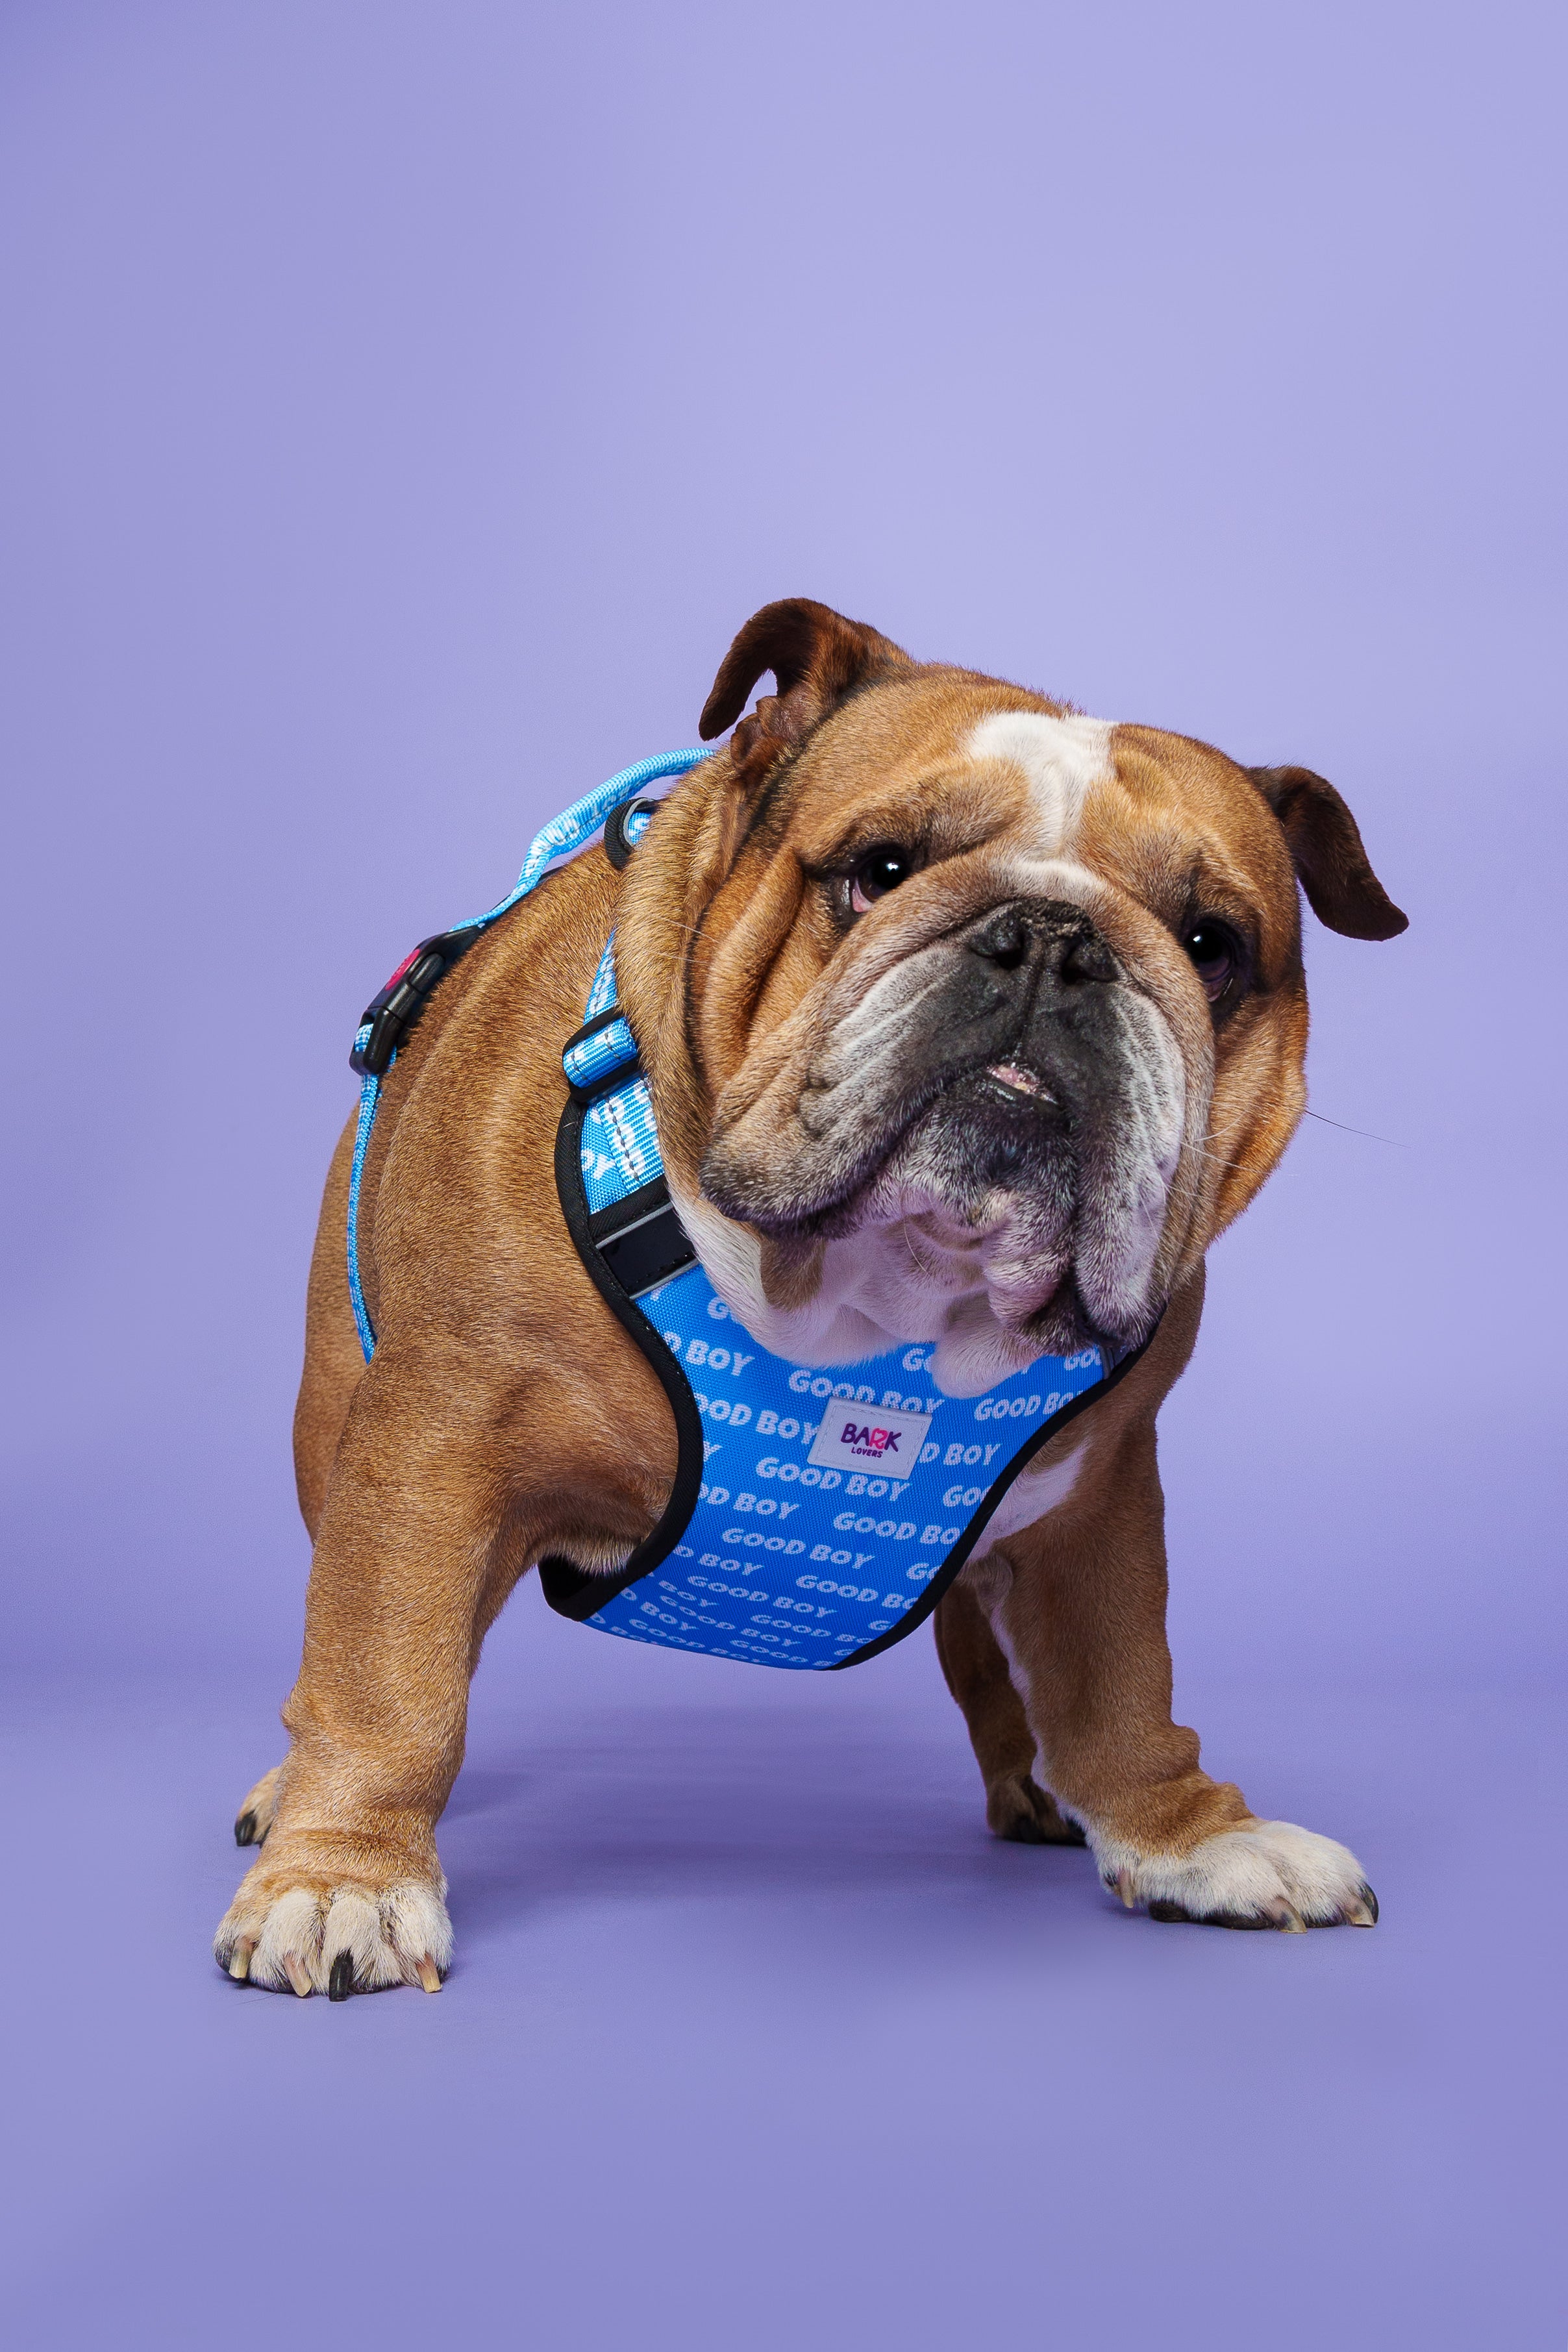 Durable Good Boy Dog Harness - Ensure comfortable and controlled walks.